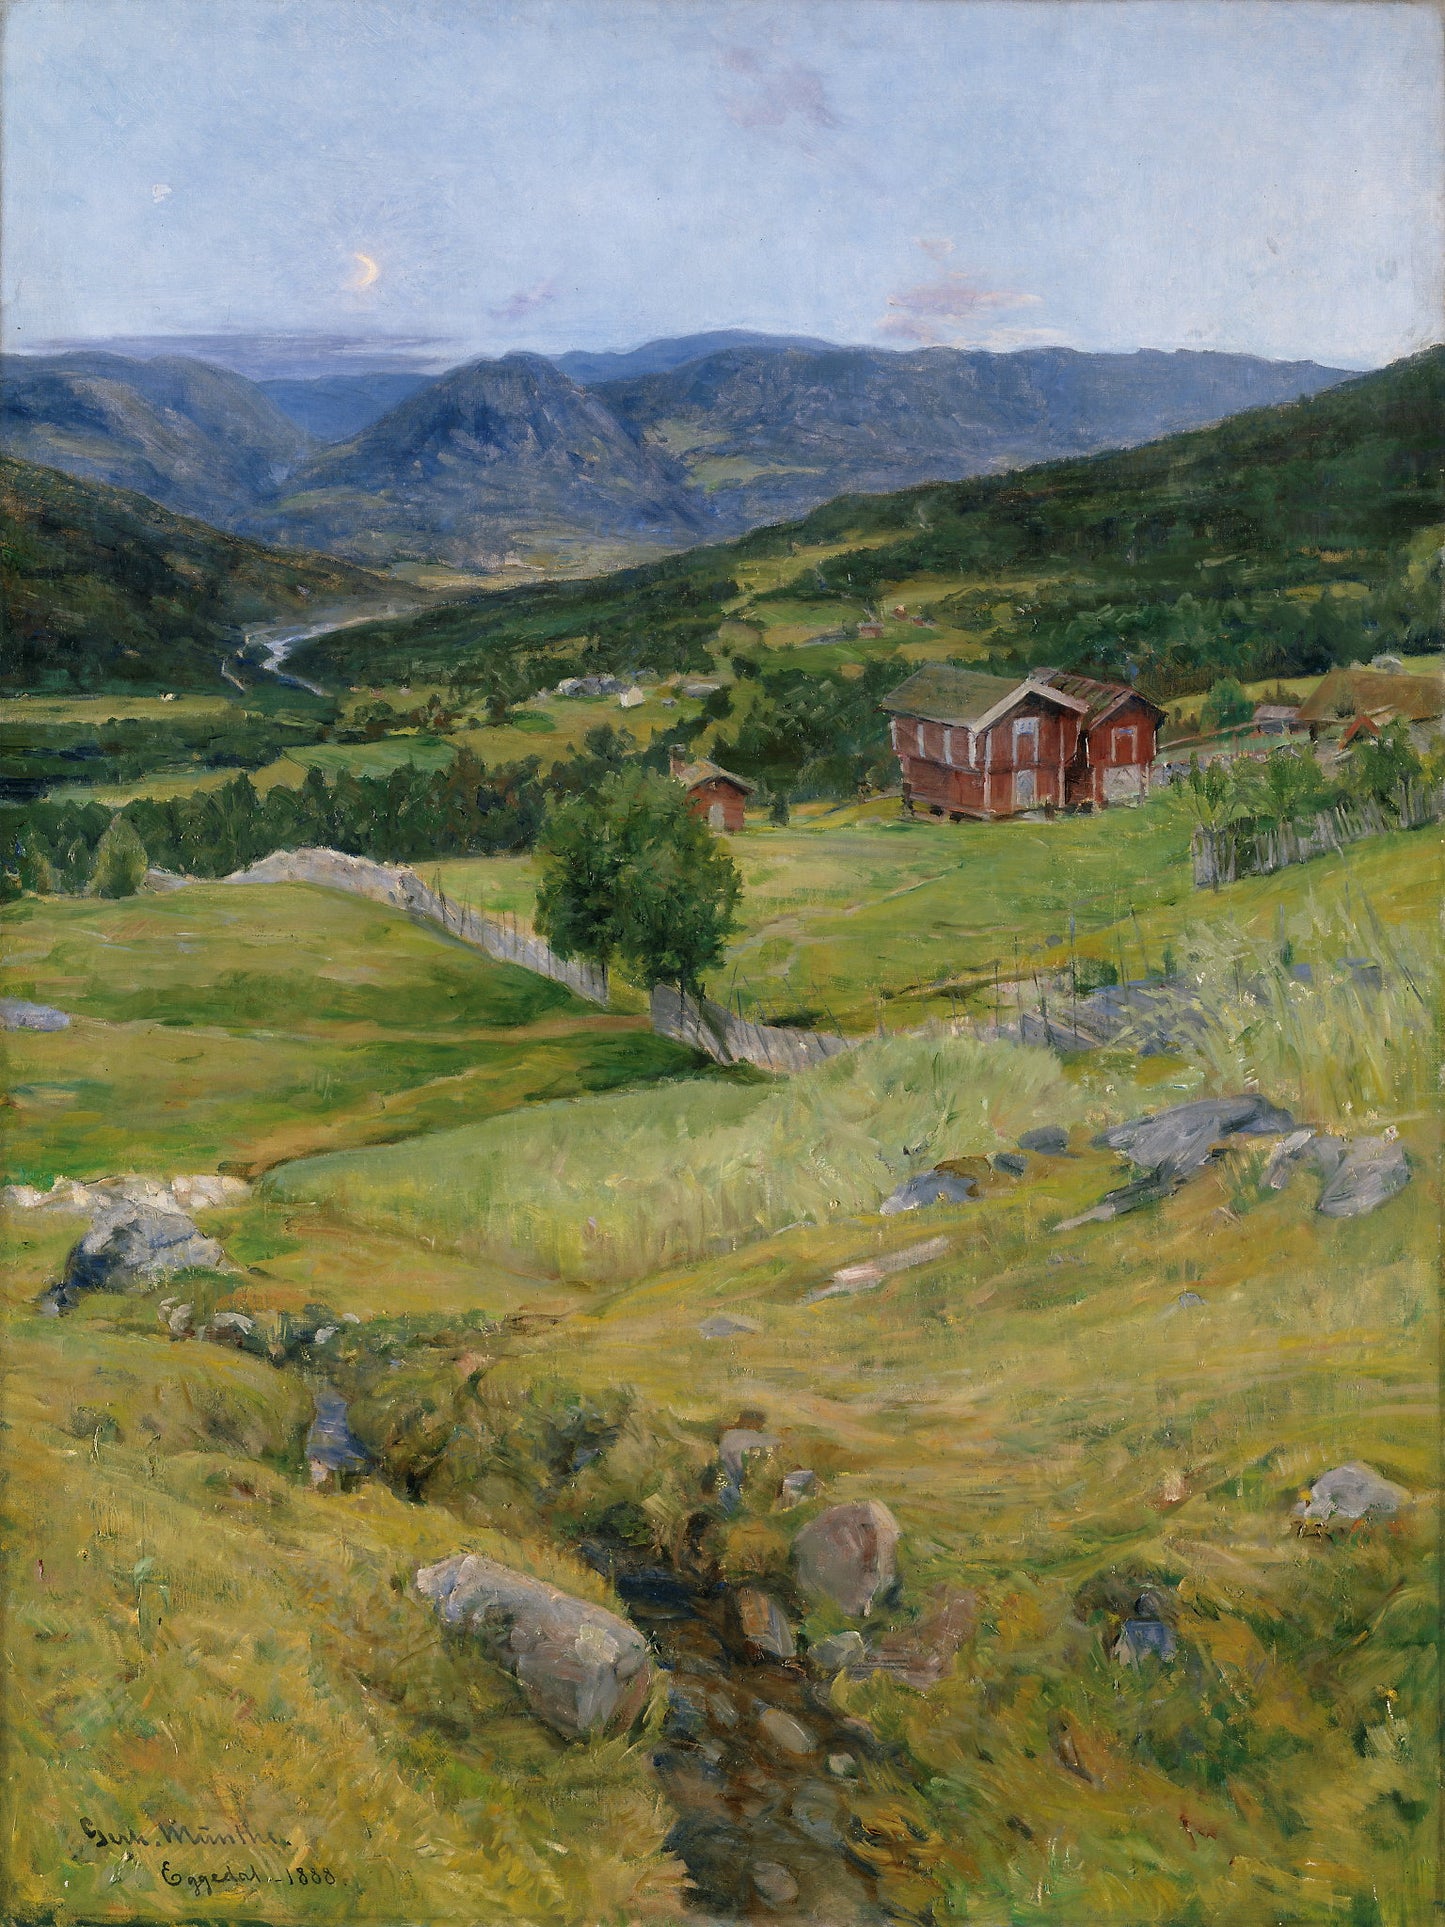 The evening in Eggedal